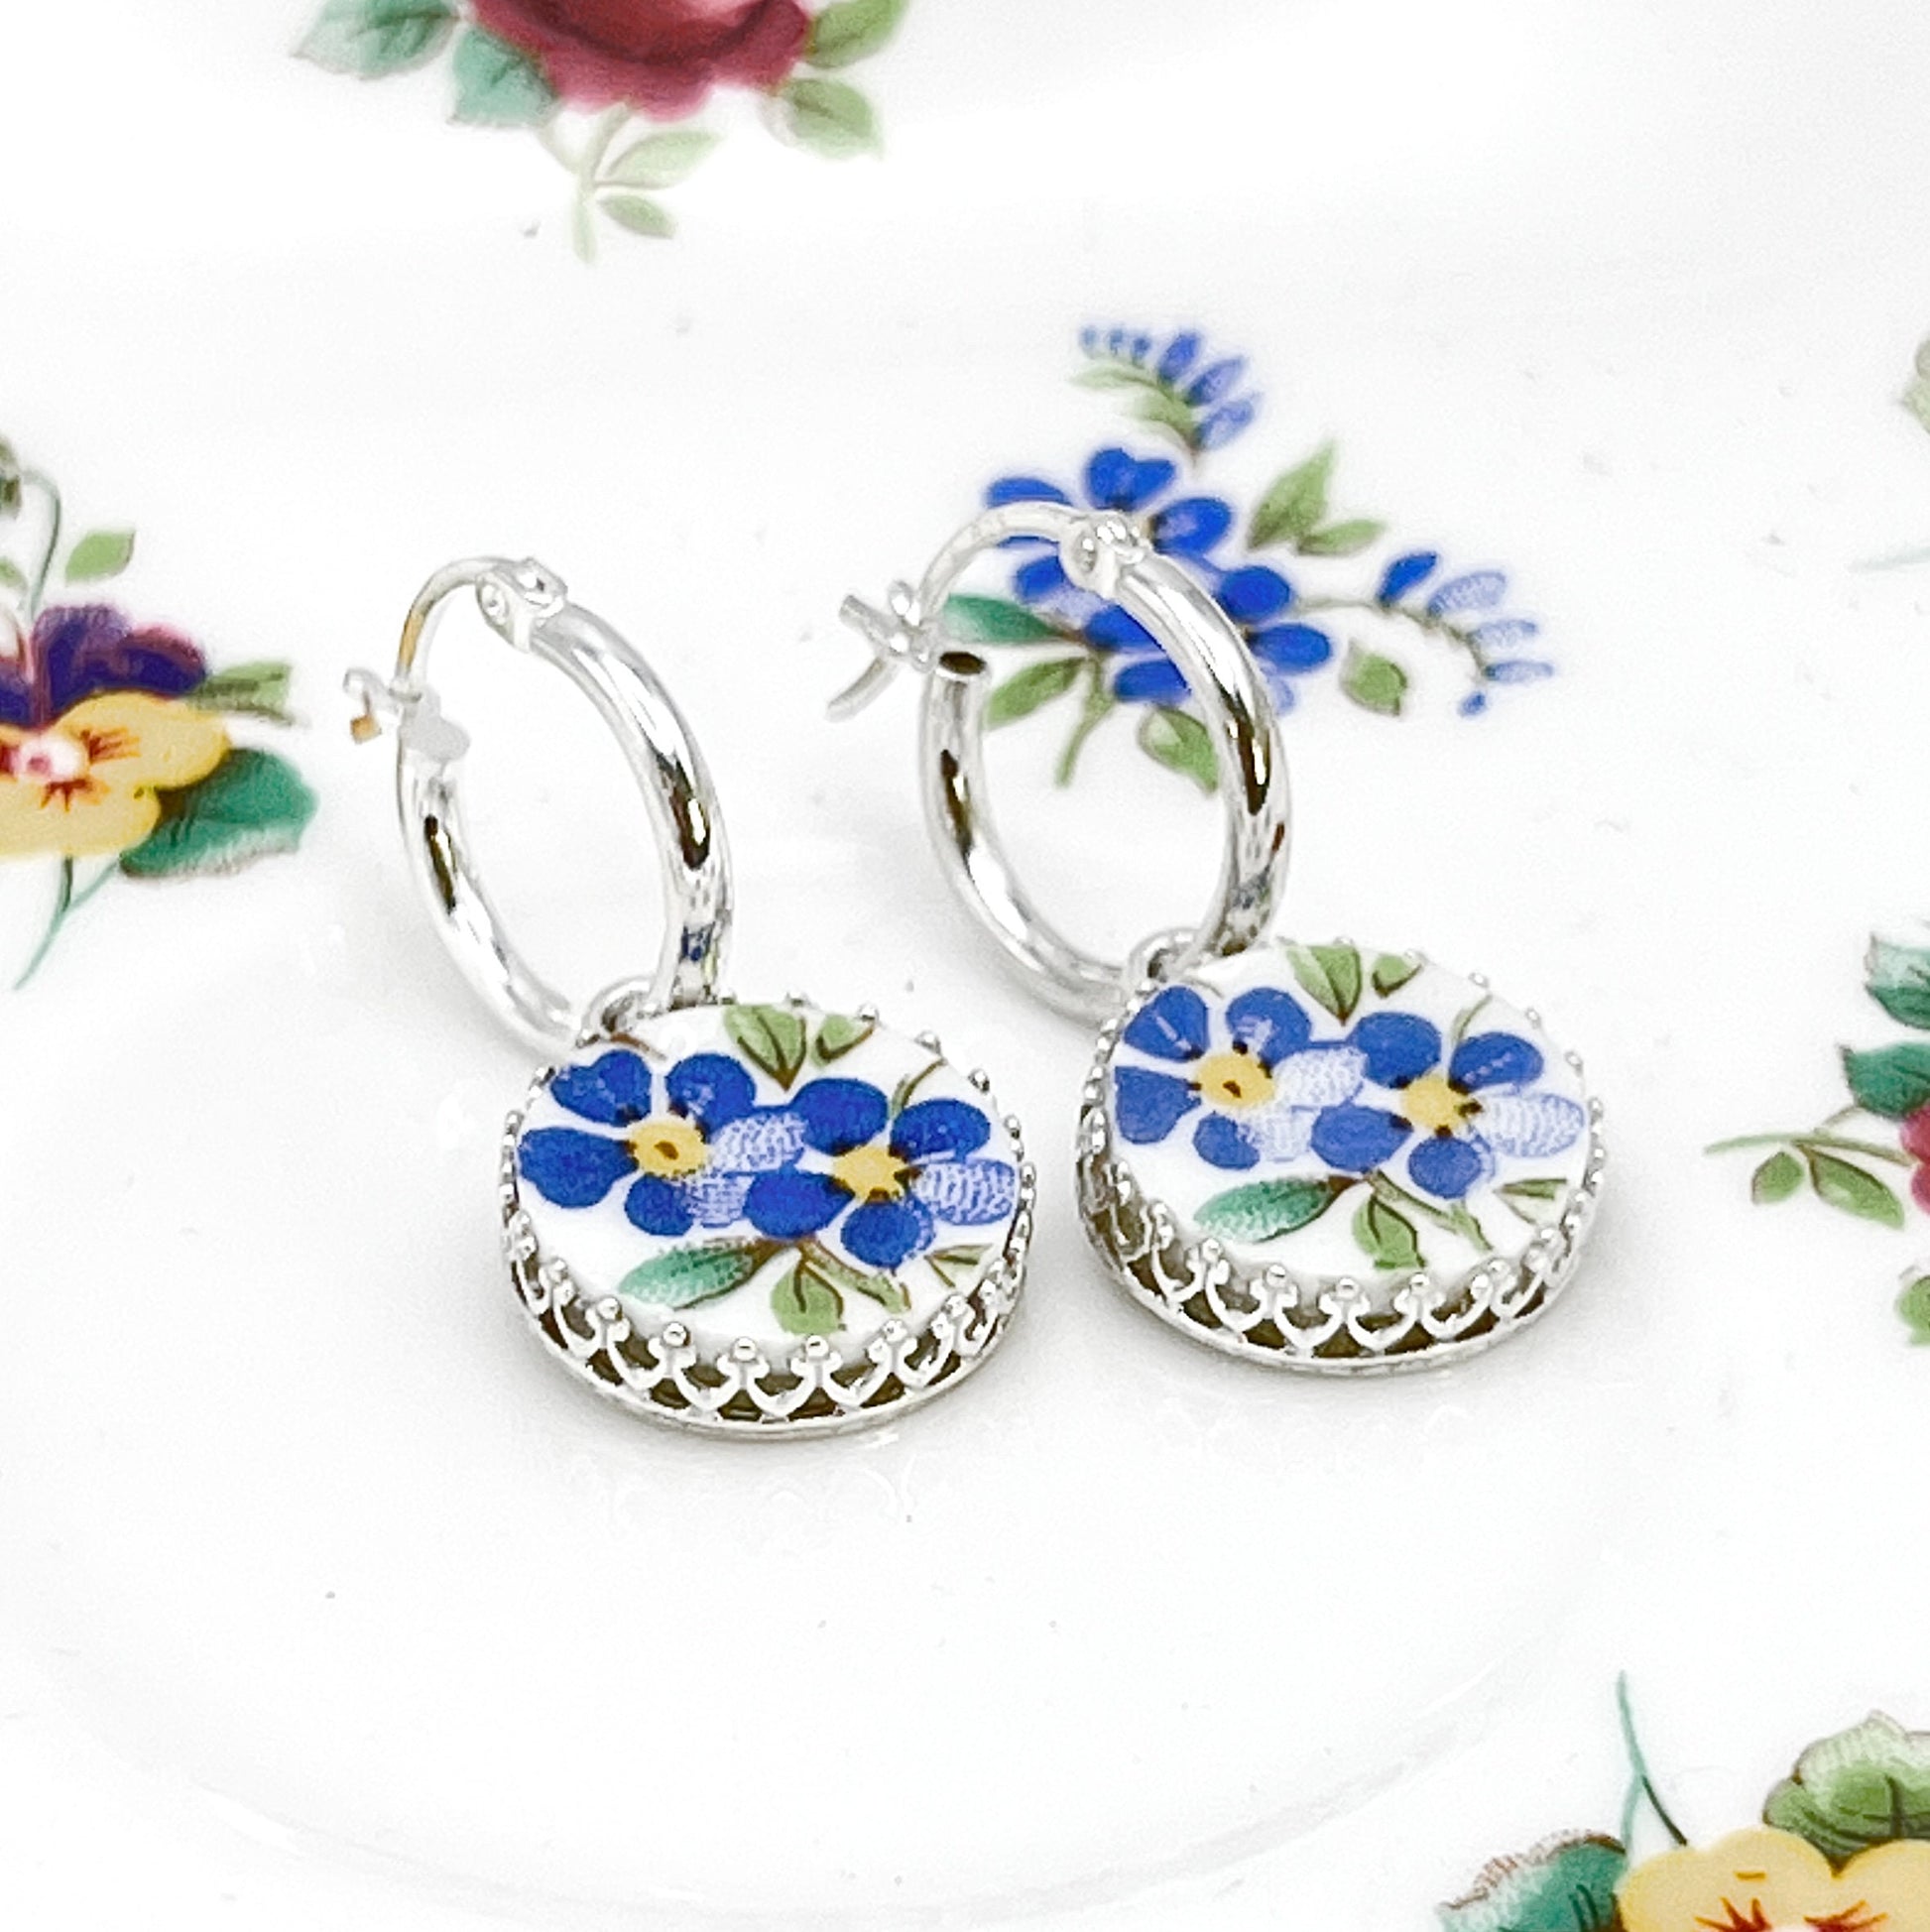 Blue Forget Me Not Earrings, Unique 20th Anniversary Gift for Wife, Broken China Jewelry, Sterling Silver Hoop Earrings